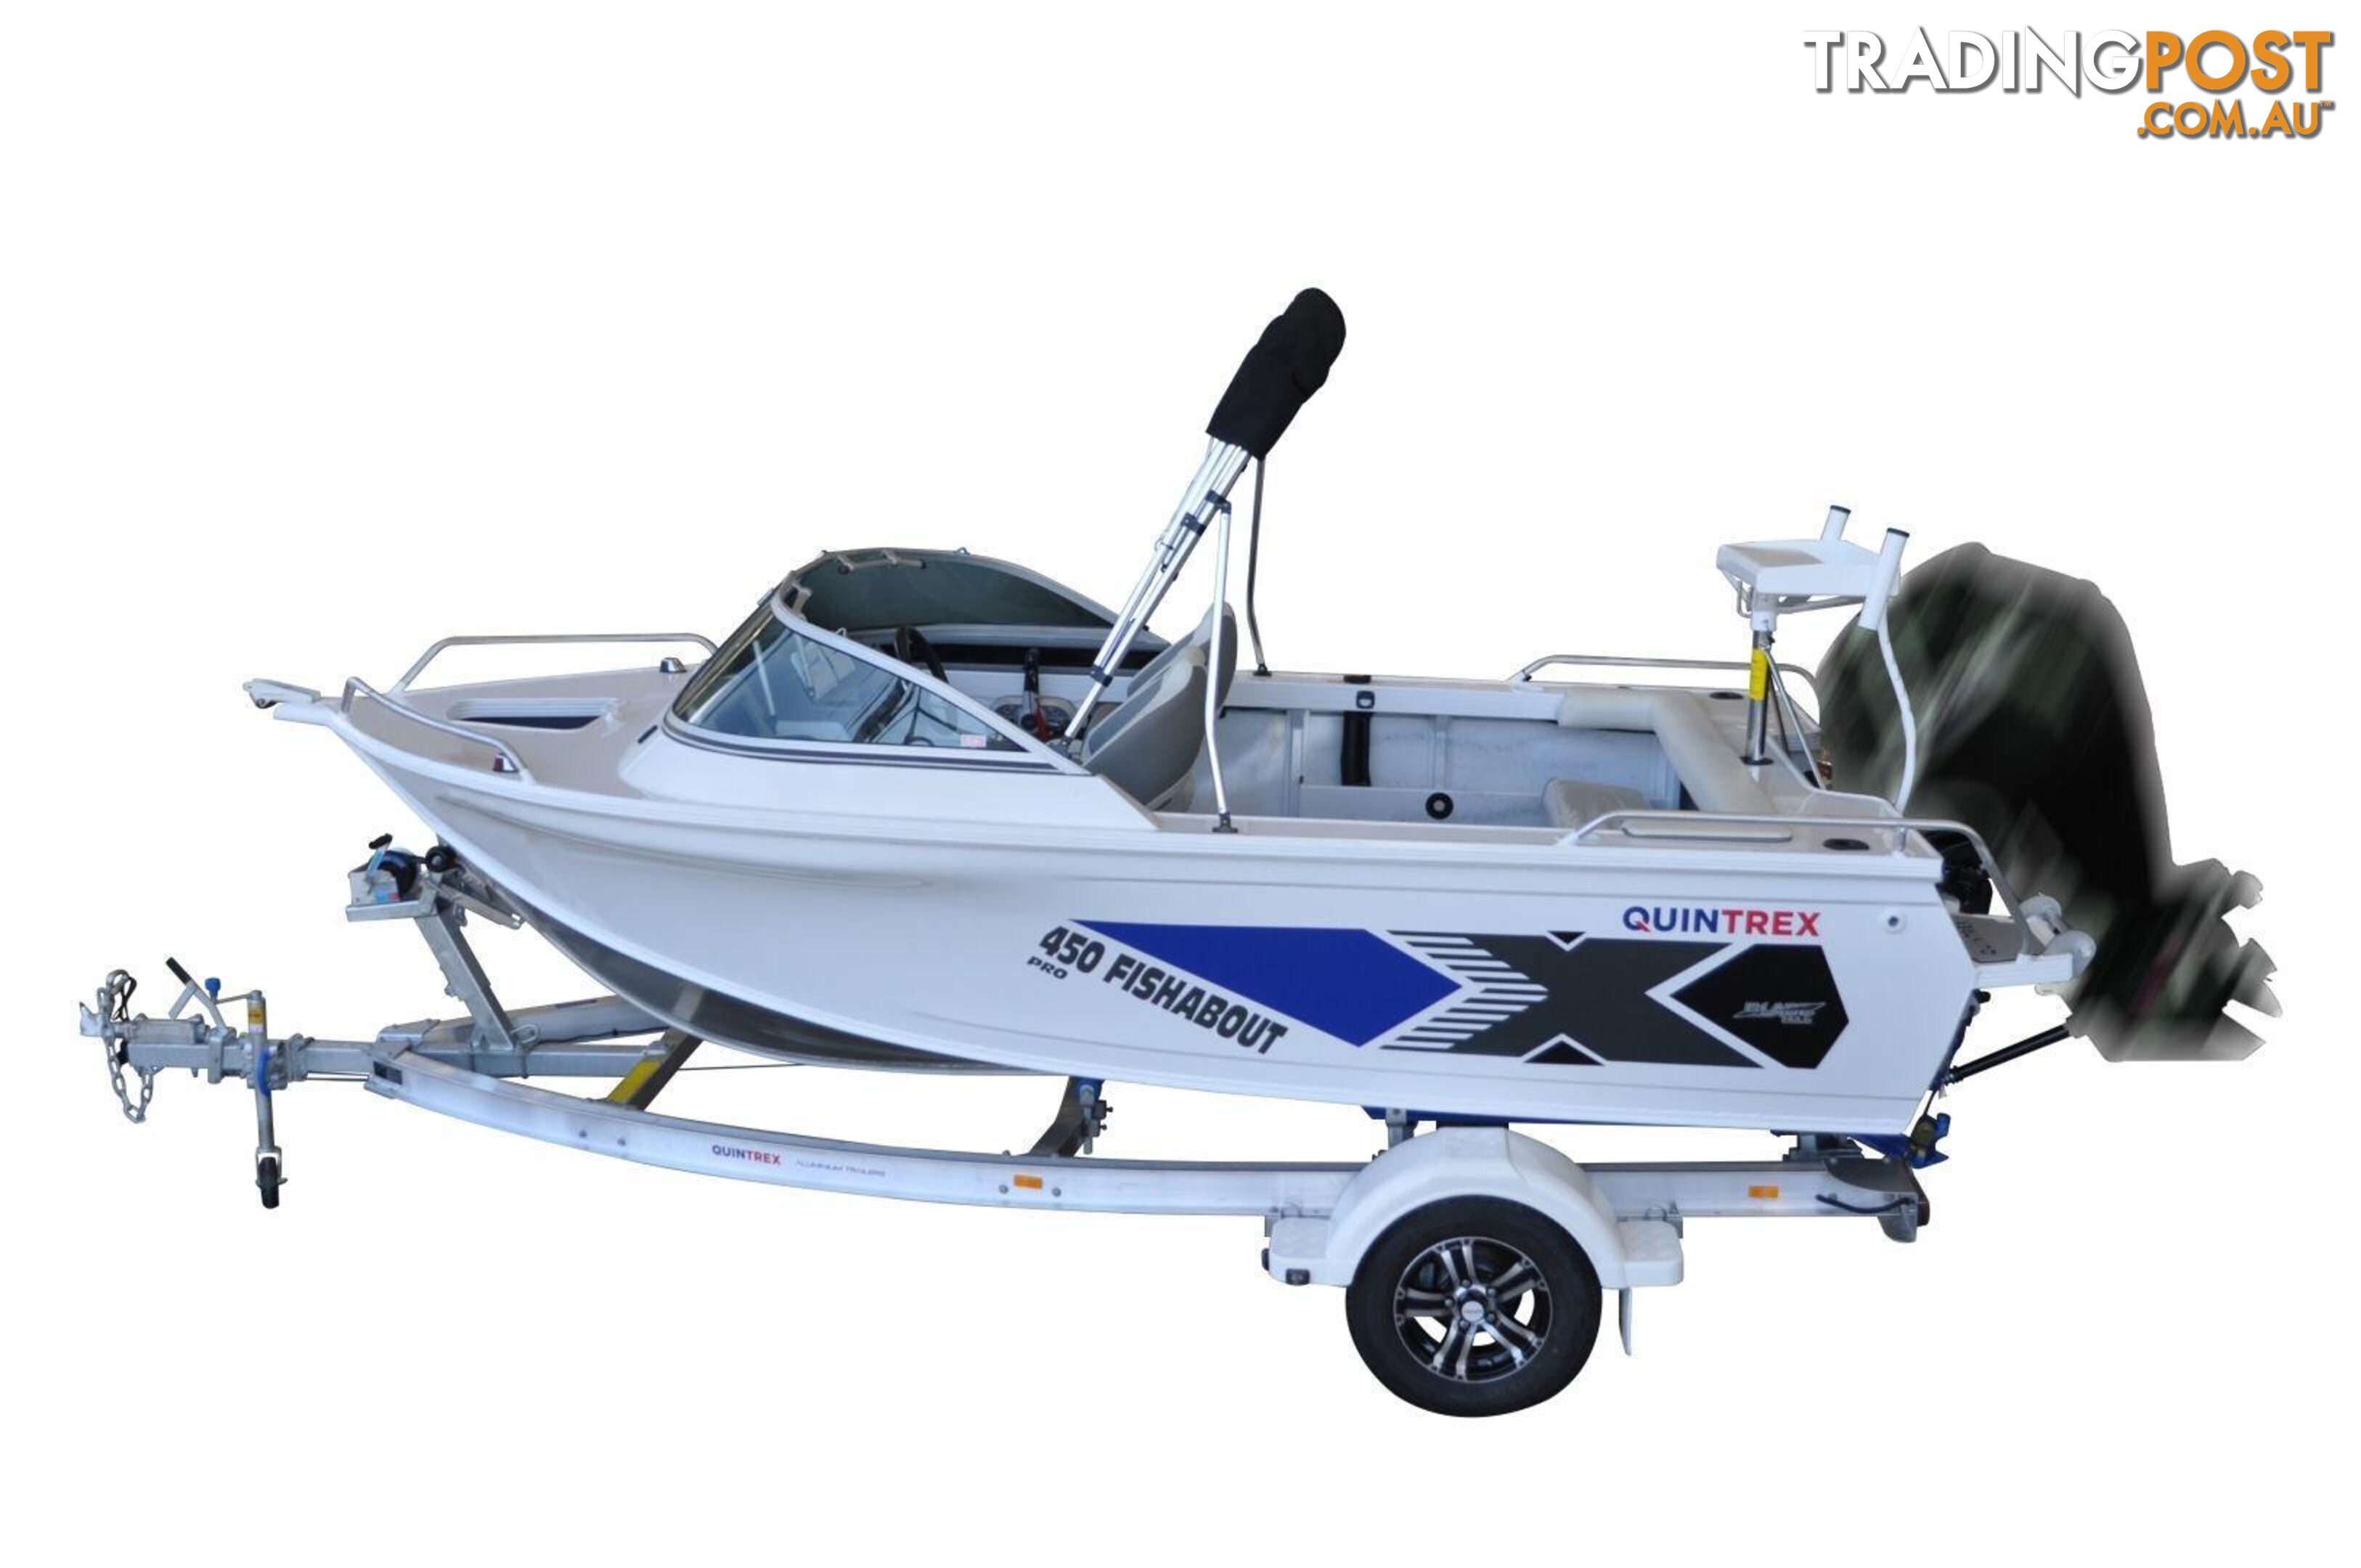 Quintrex 450 Fishabout PRO+ Yamaha F70hp 4-Stroke - PRO Pack for sale online prices